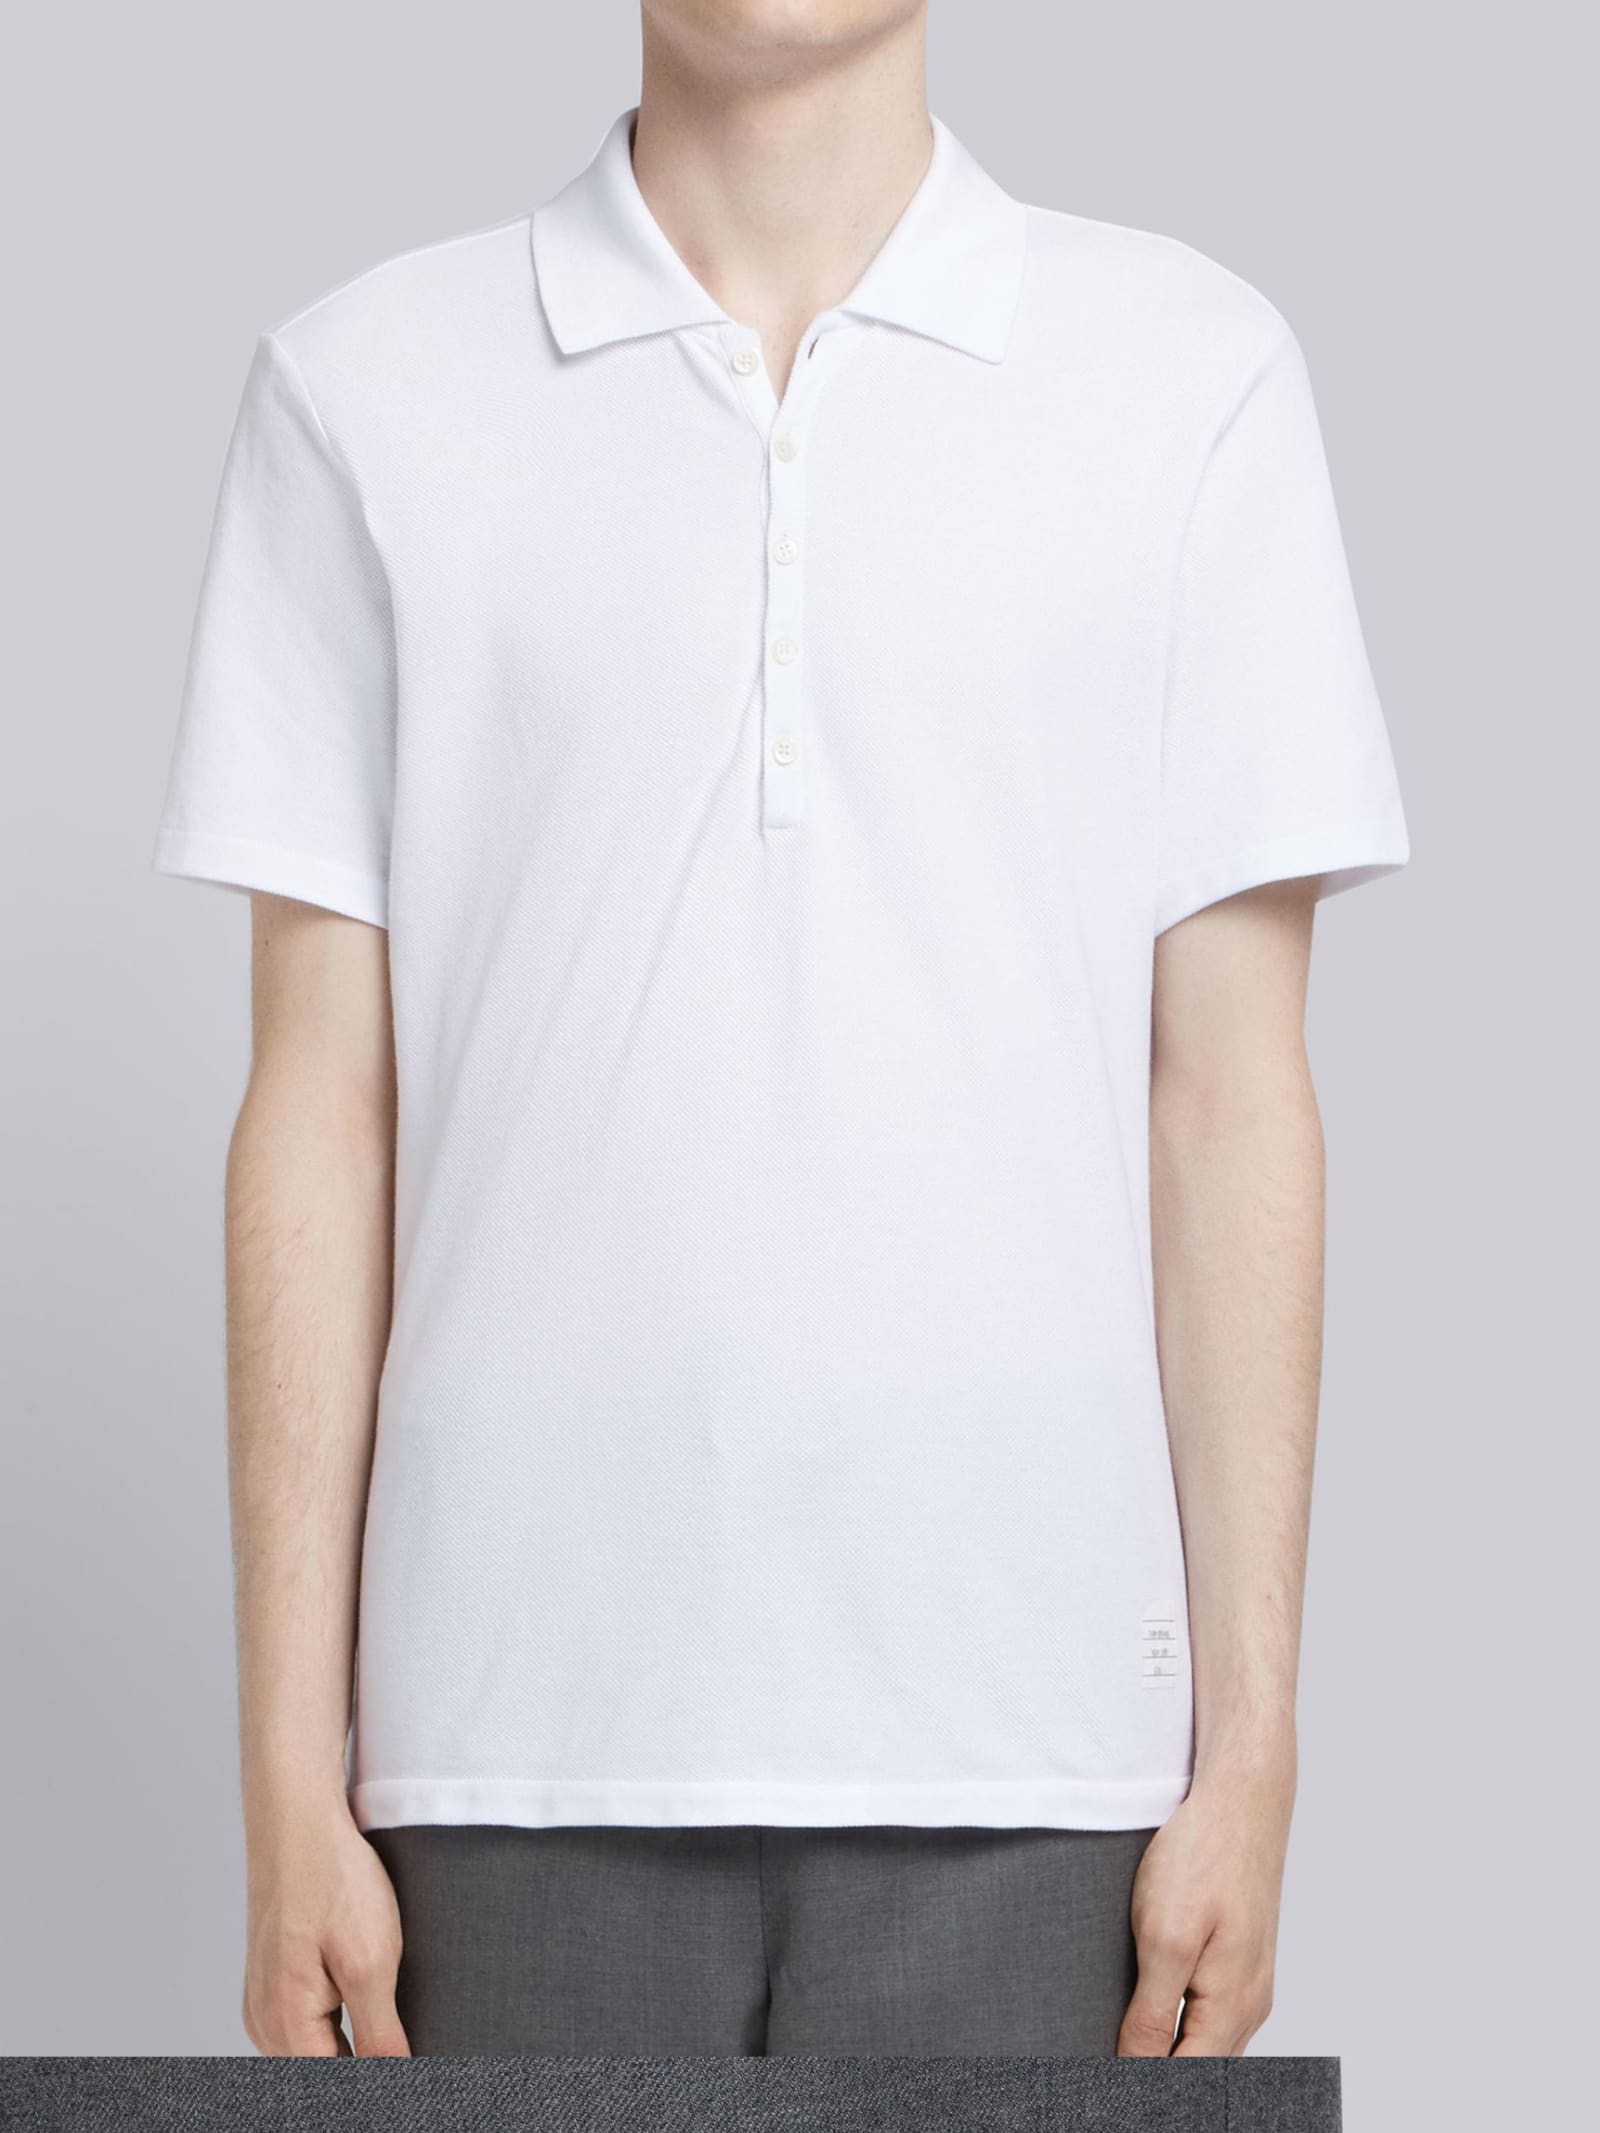 THOM BROWNE WHITE POLO SHIRT WITH STRIPED DETAIL